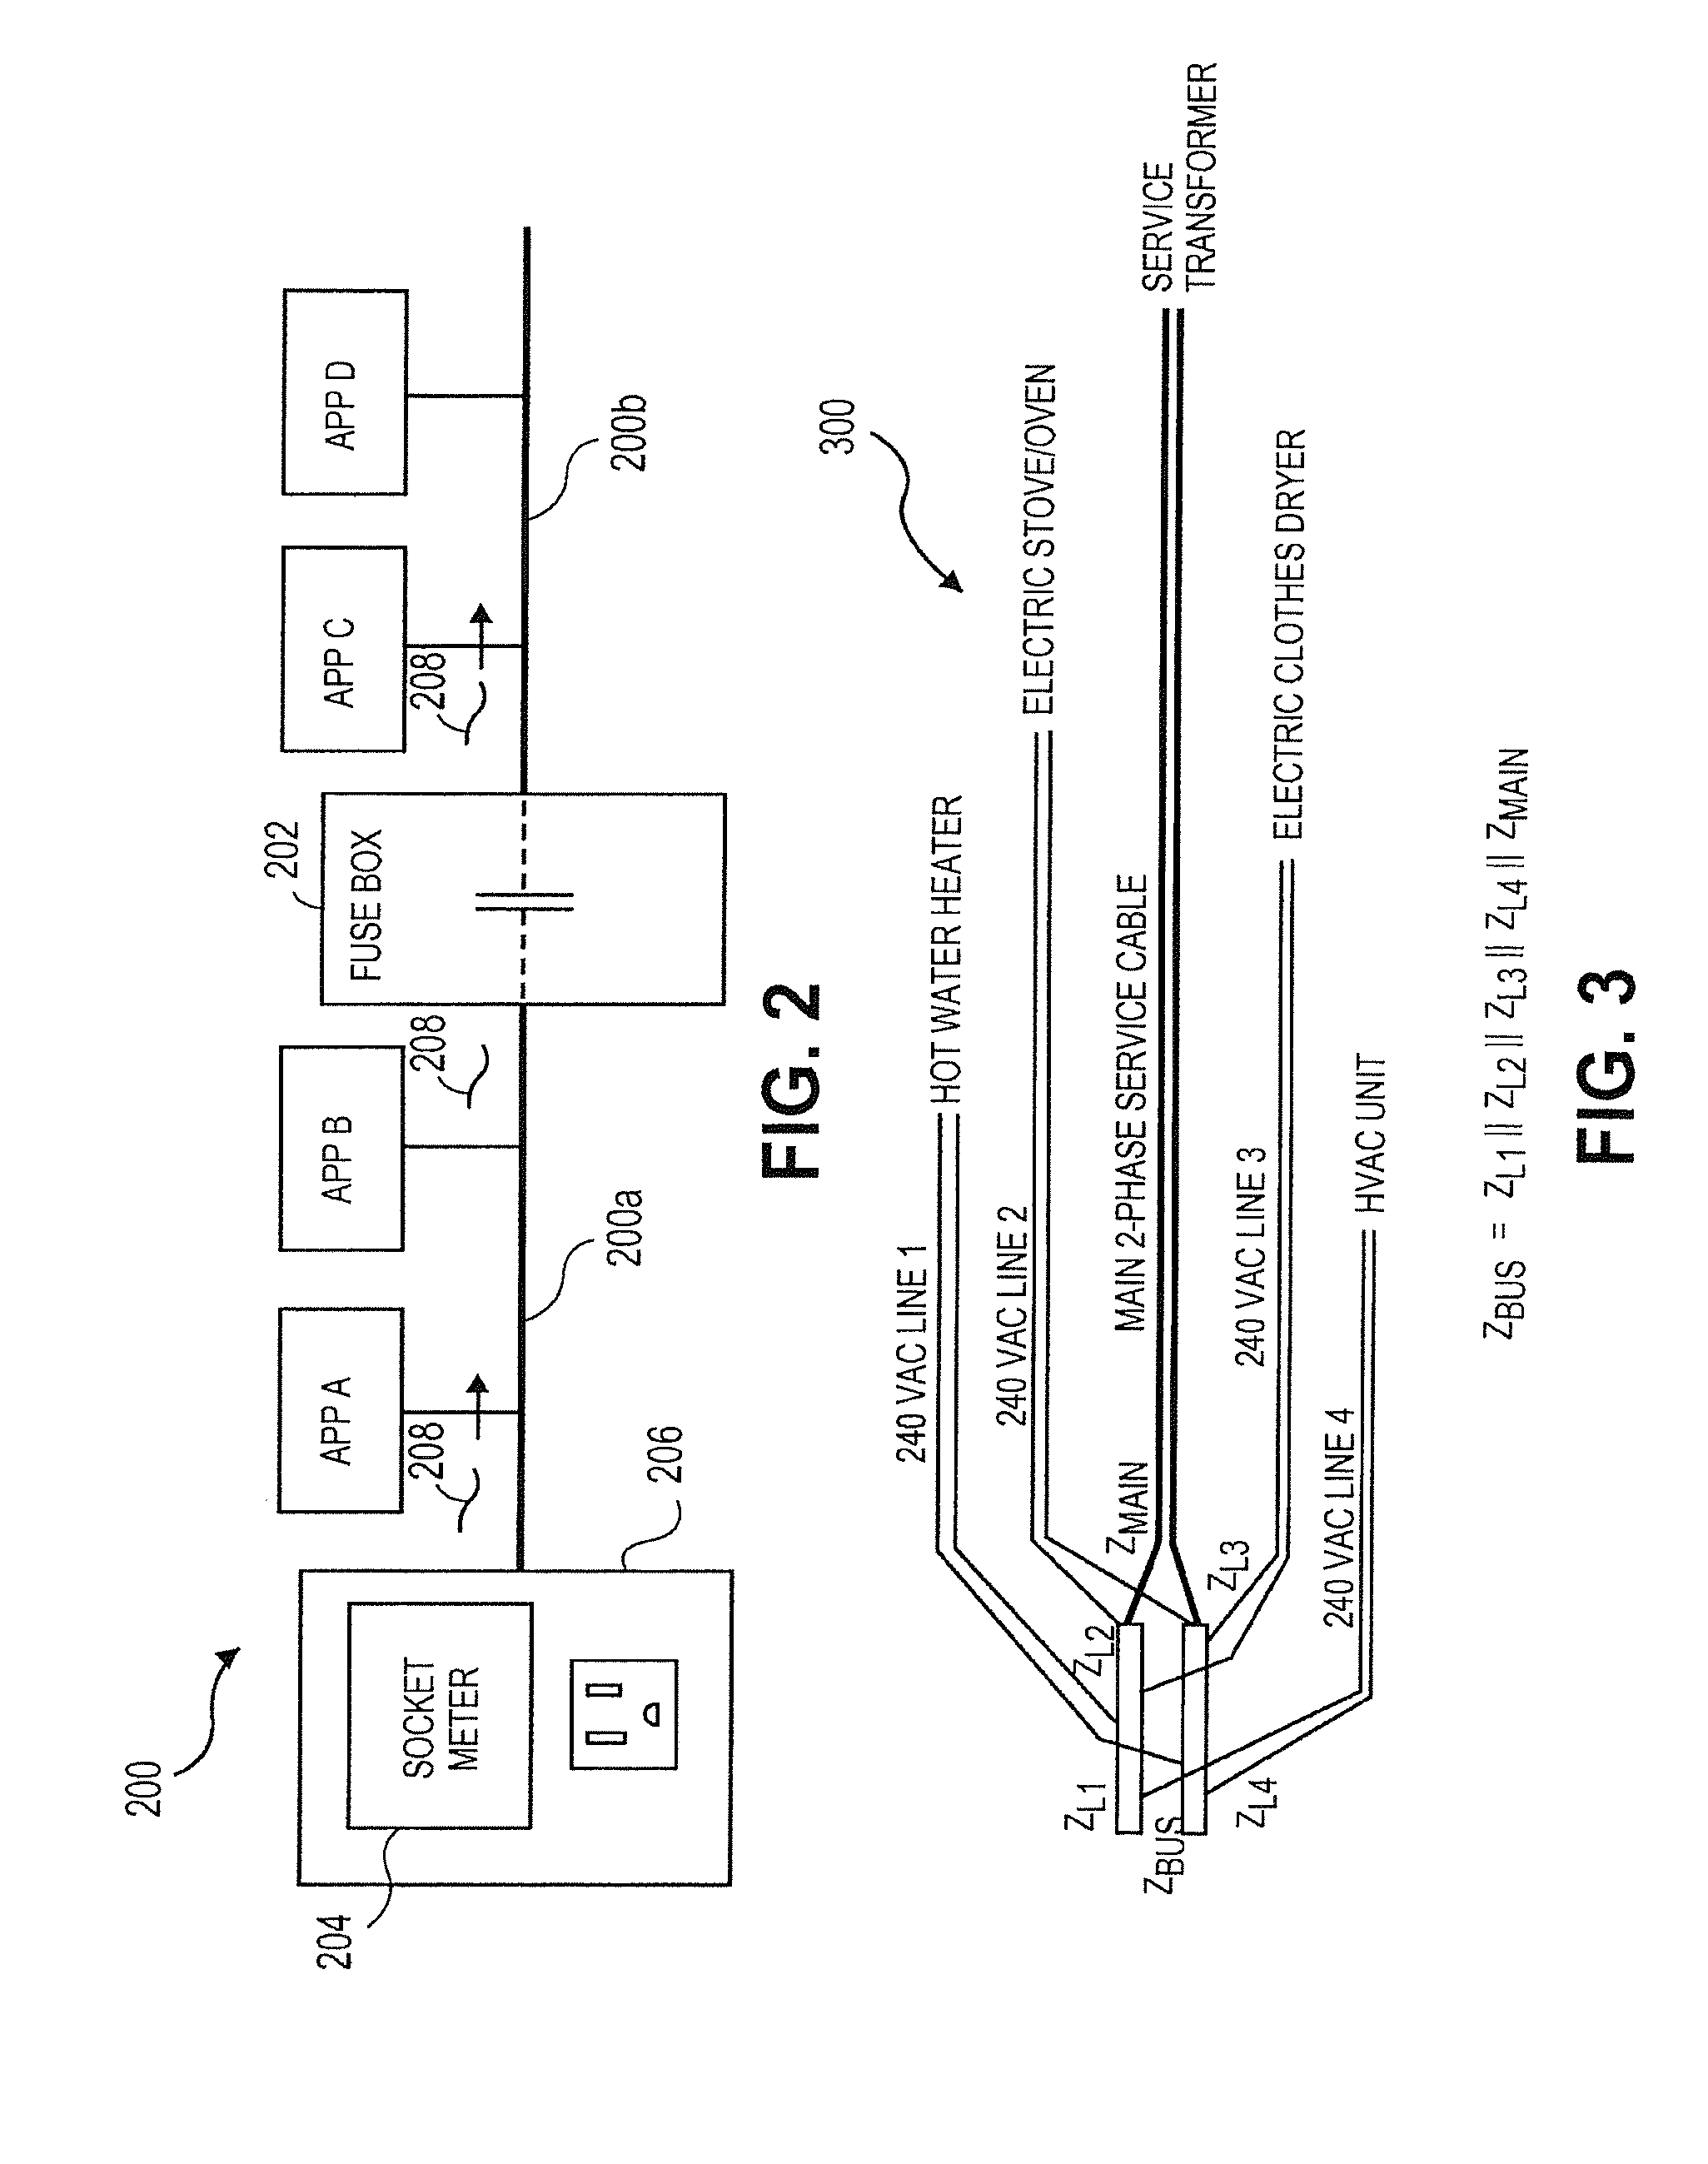 System and method to measure and control power consumption in a residential or commercial building via a wall socket to ensure optimum energy usage therein